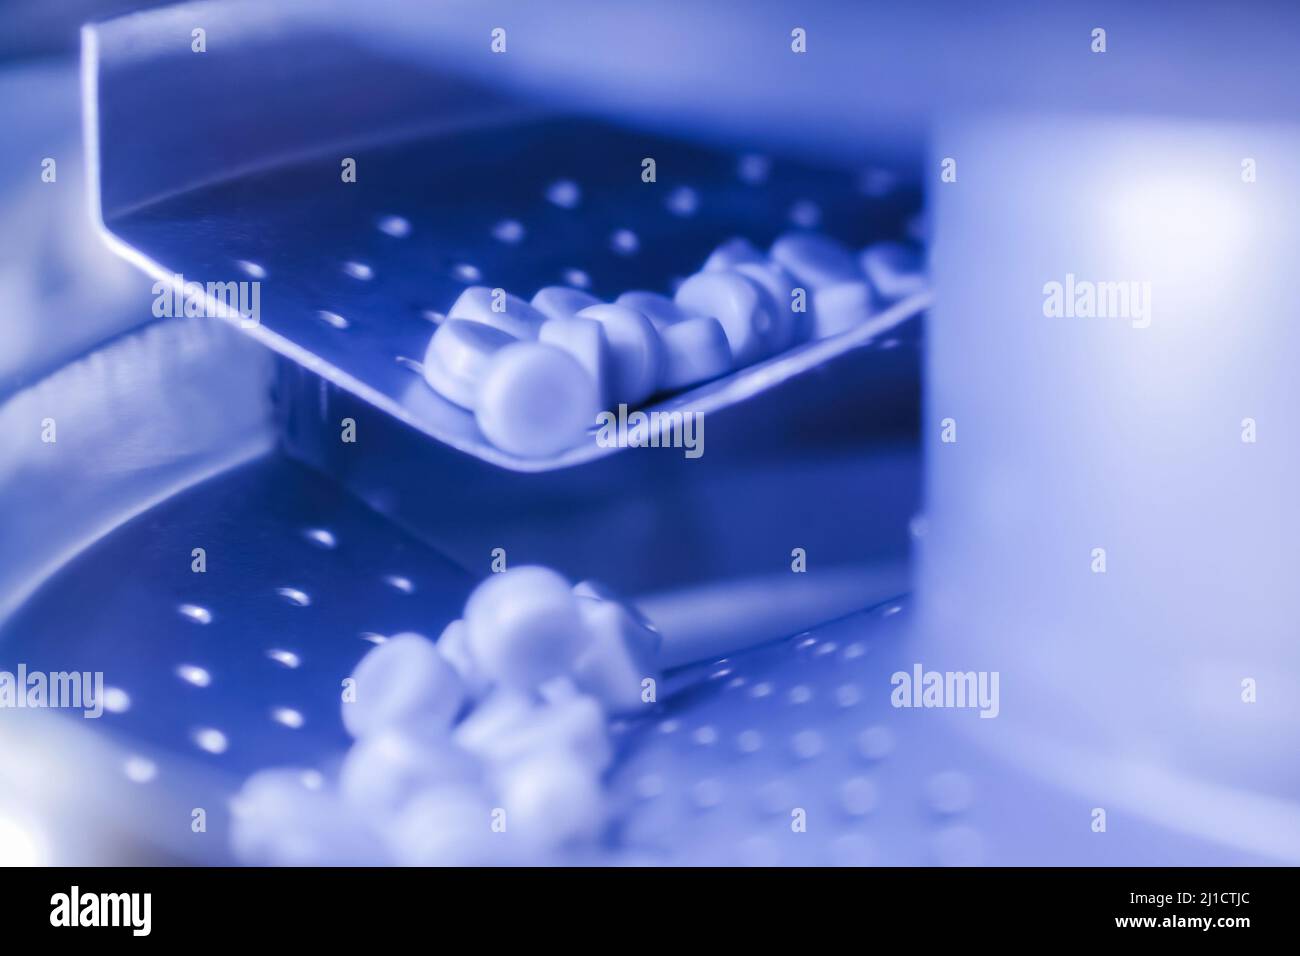 Close up: deduster machine with conveyor for dedusting pills, tablets, meds Stock Photo